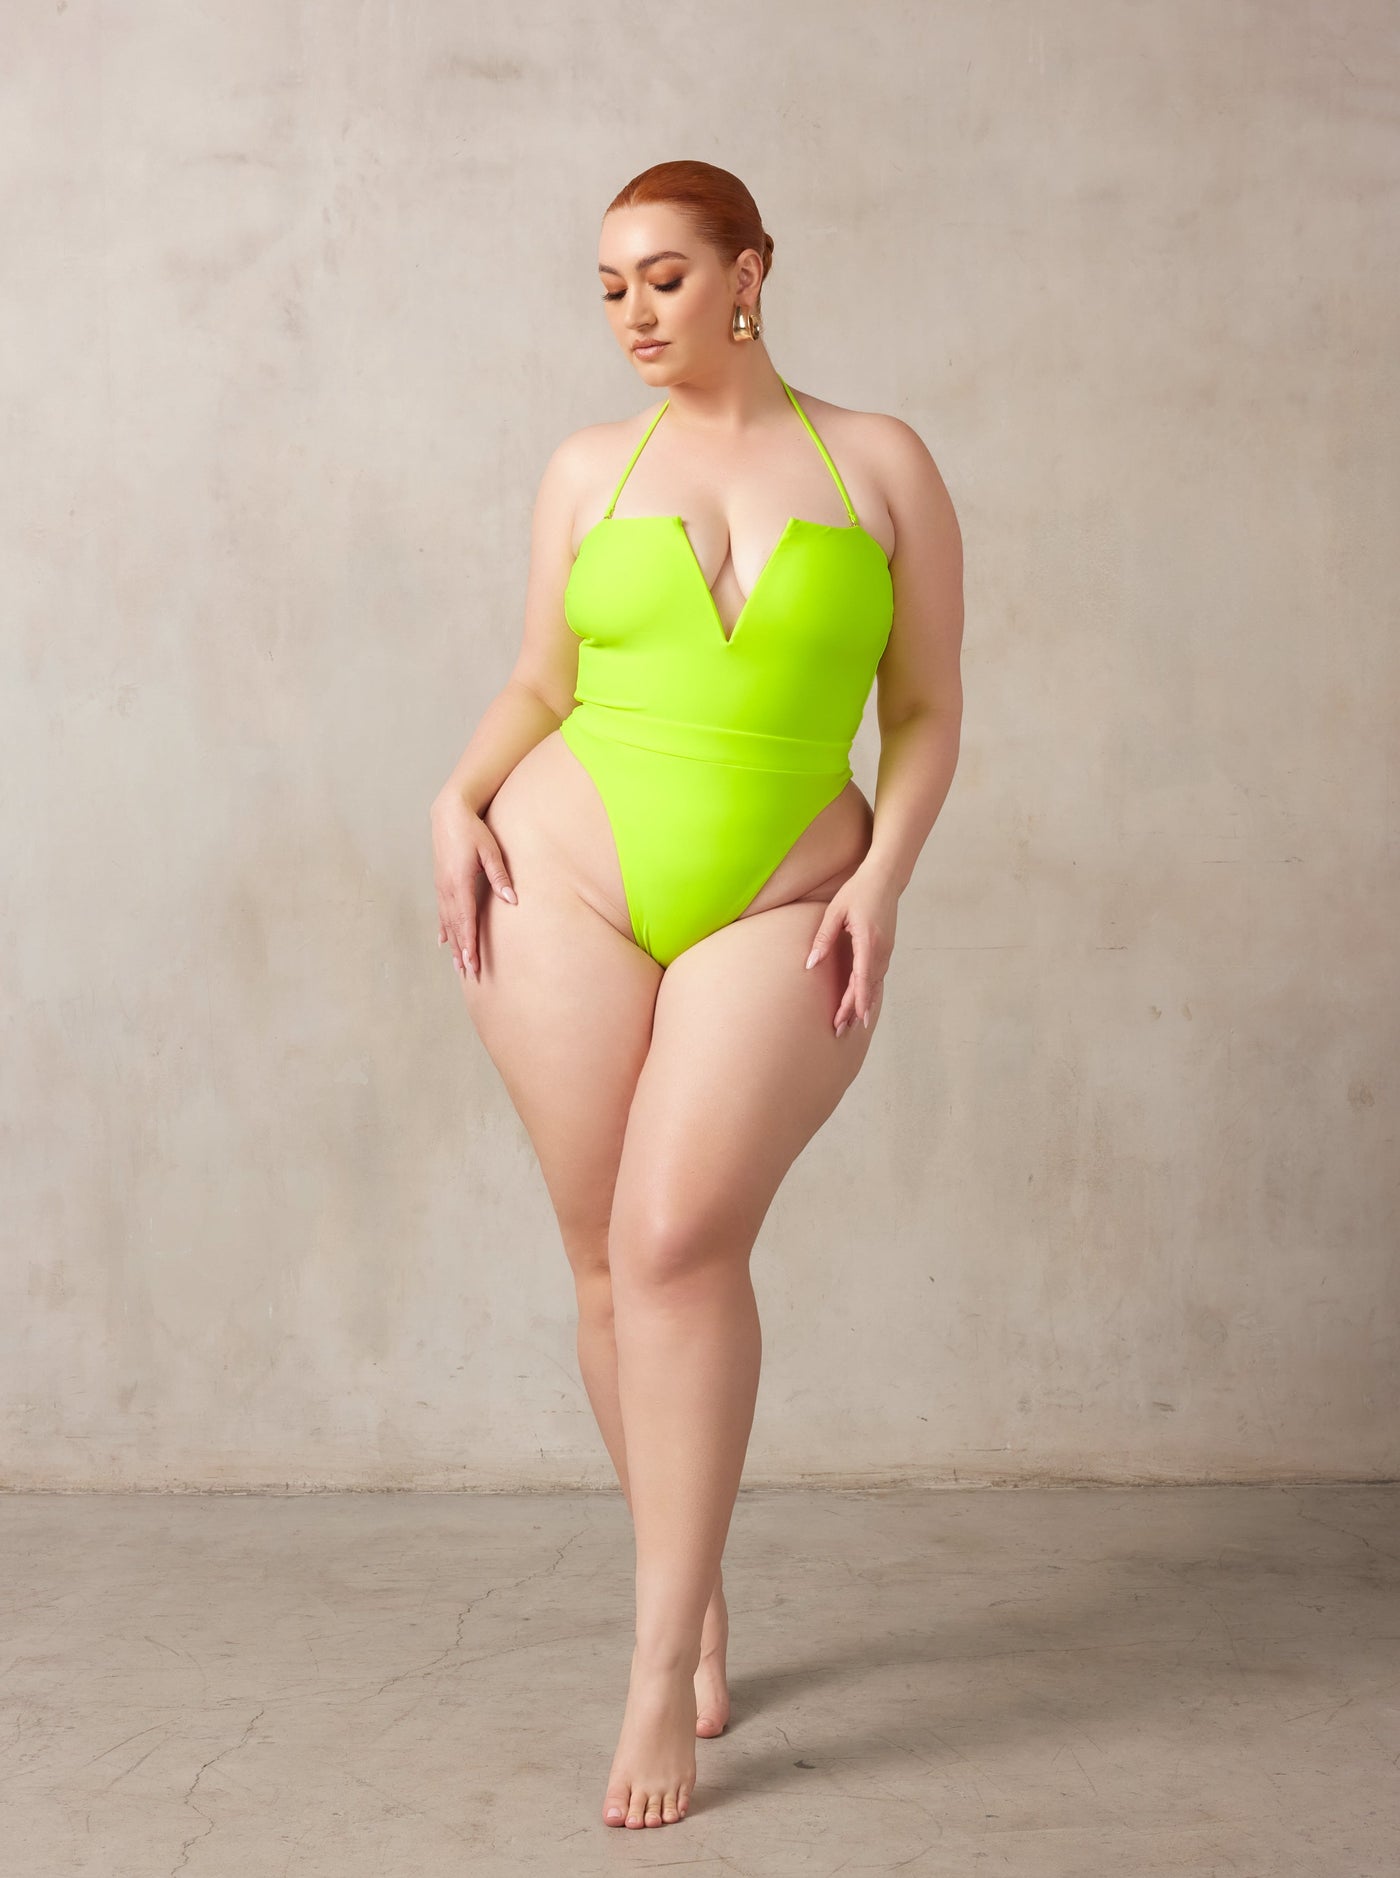 MBM Swim - Neon 80's style one-piece thong swimsuit w/ high cut sides